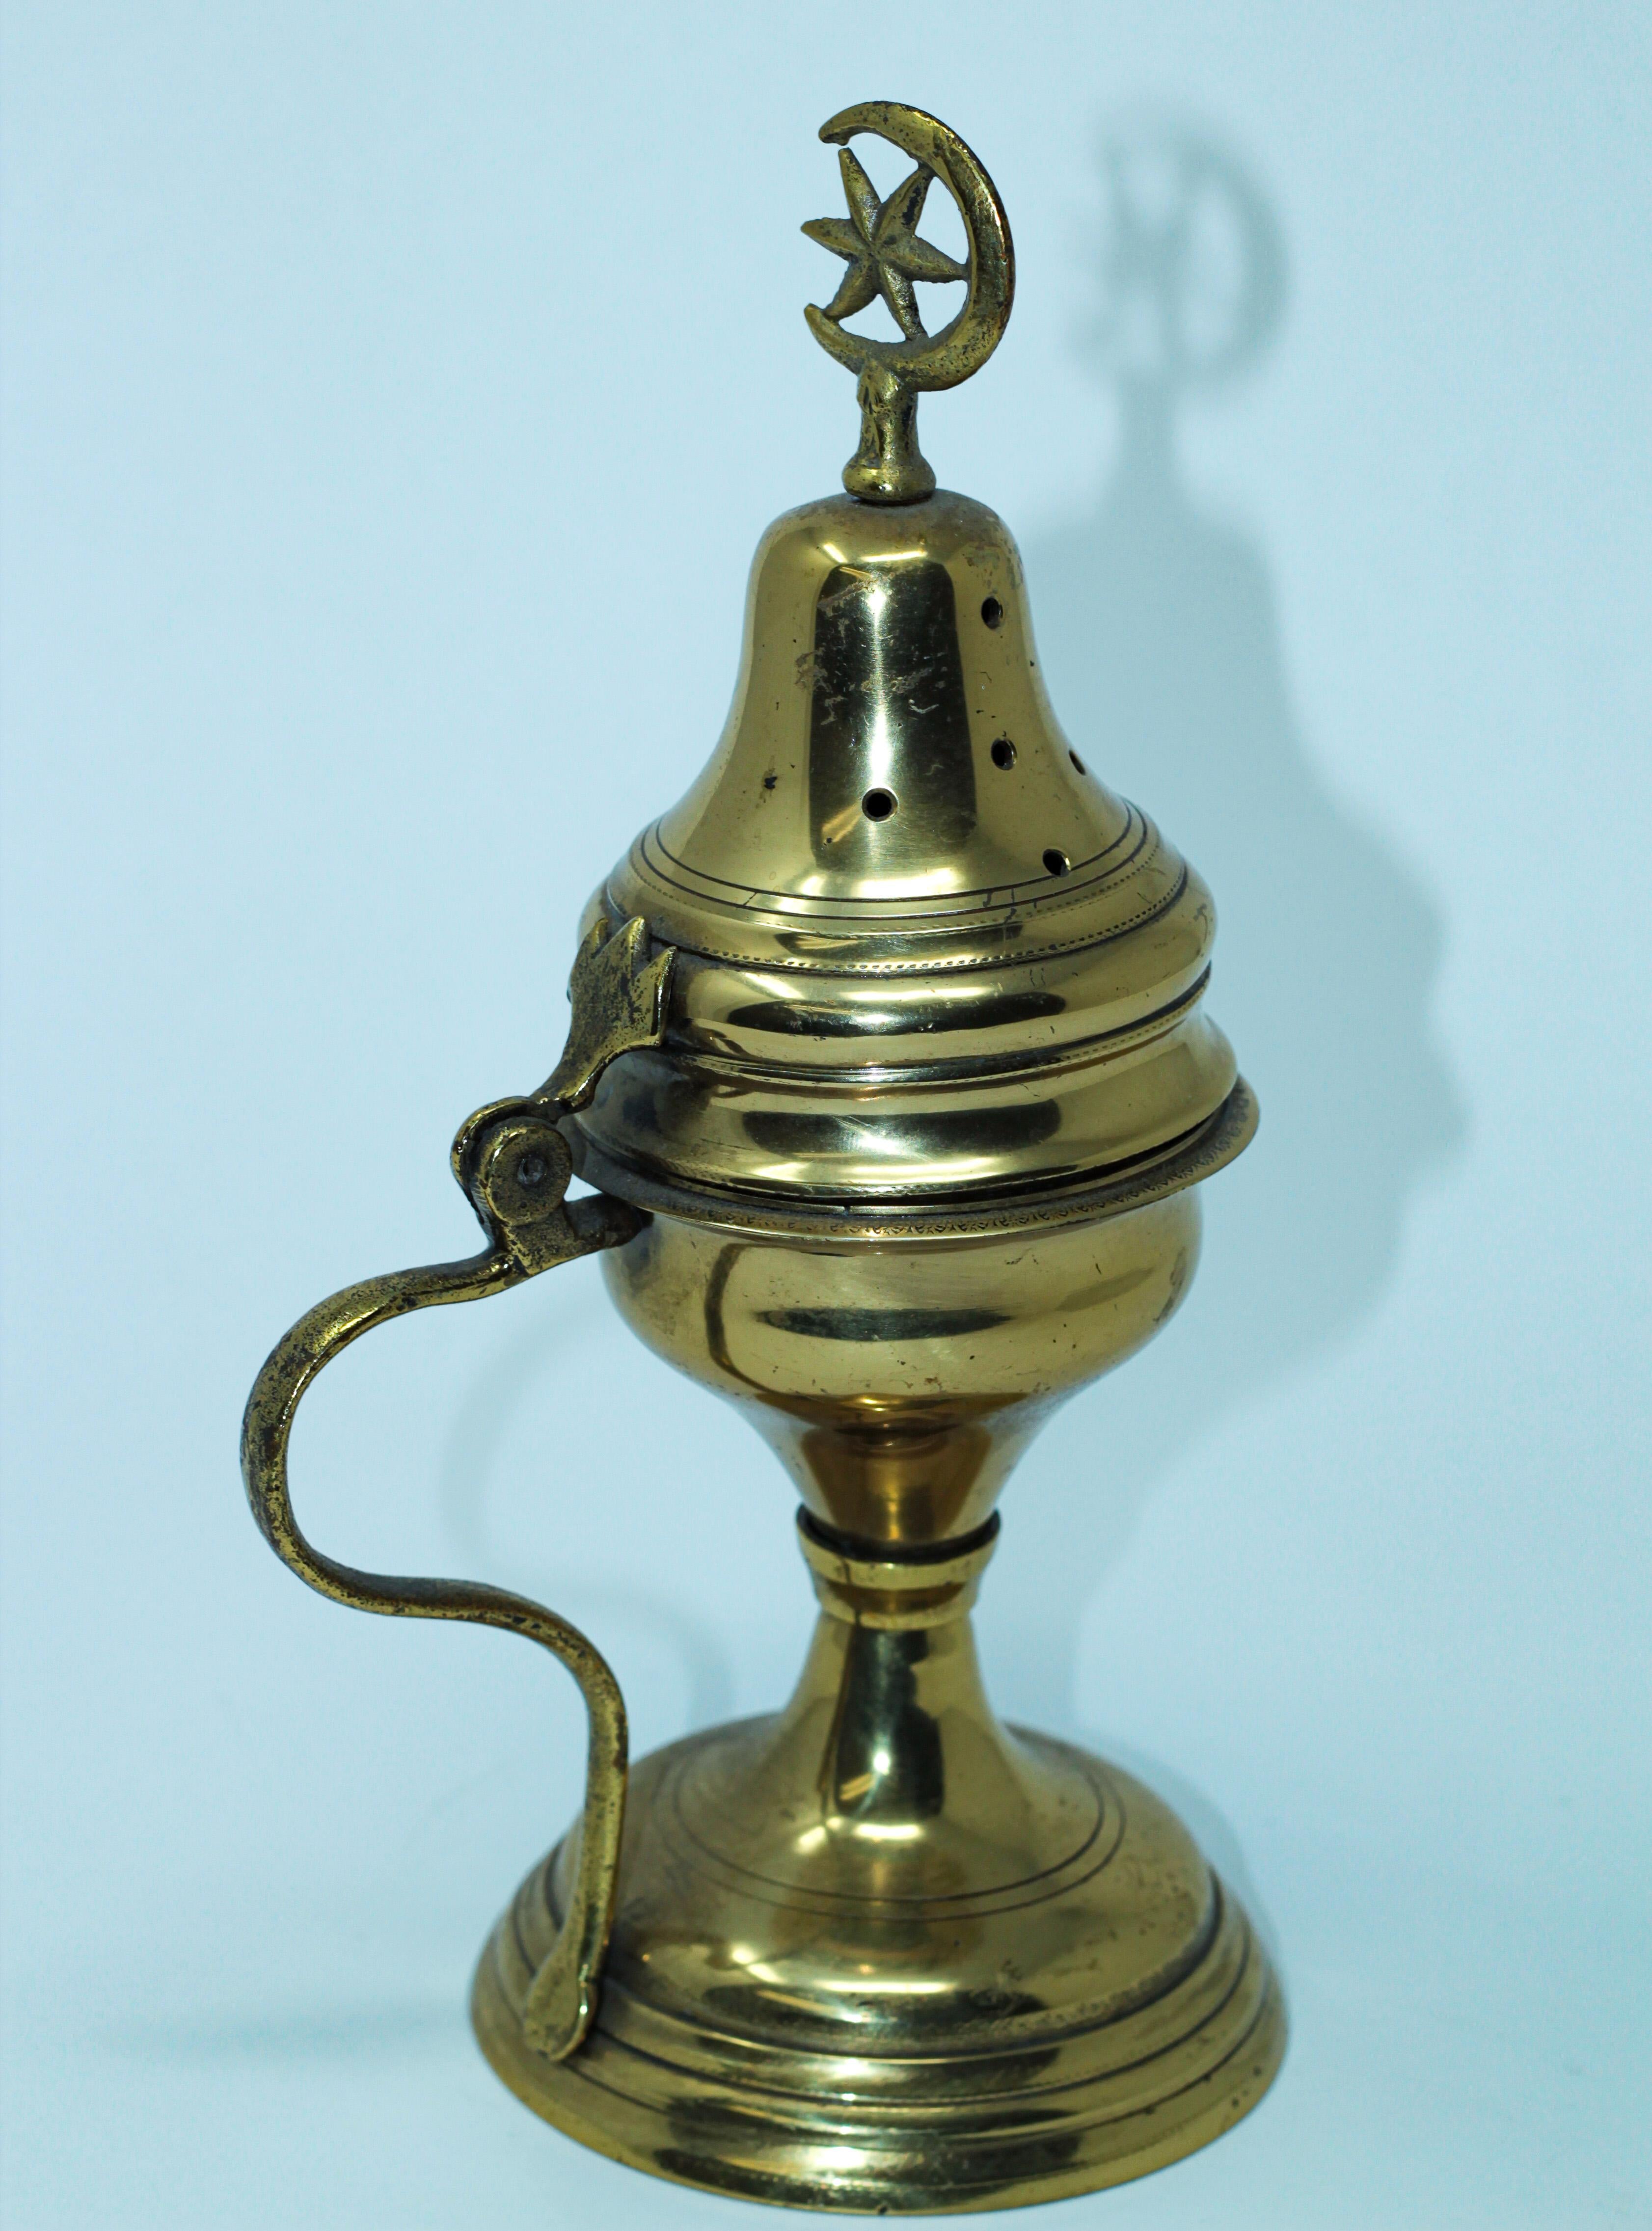 20th Century Polished Brass Incense Burner with Crescent Moon and Star Symbol